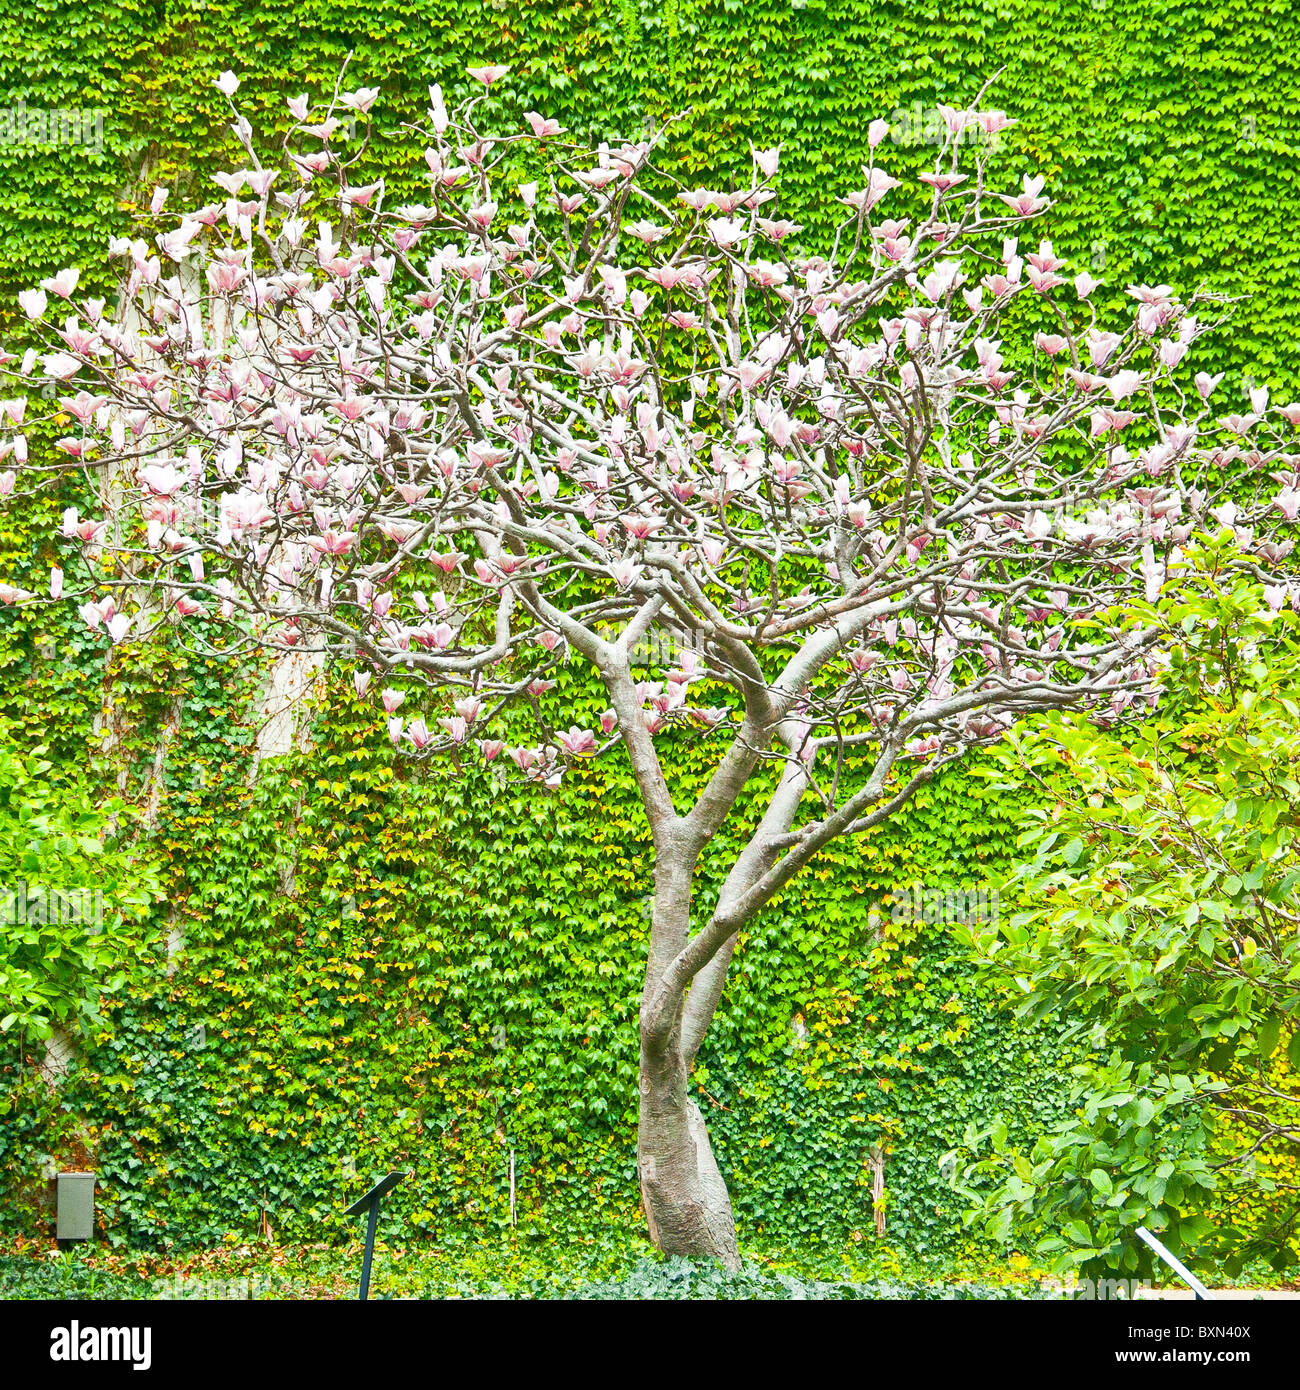 Flowering tree in front of ivy covered wall Stock Photo